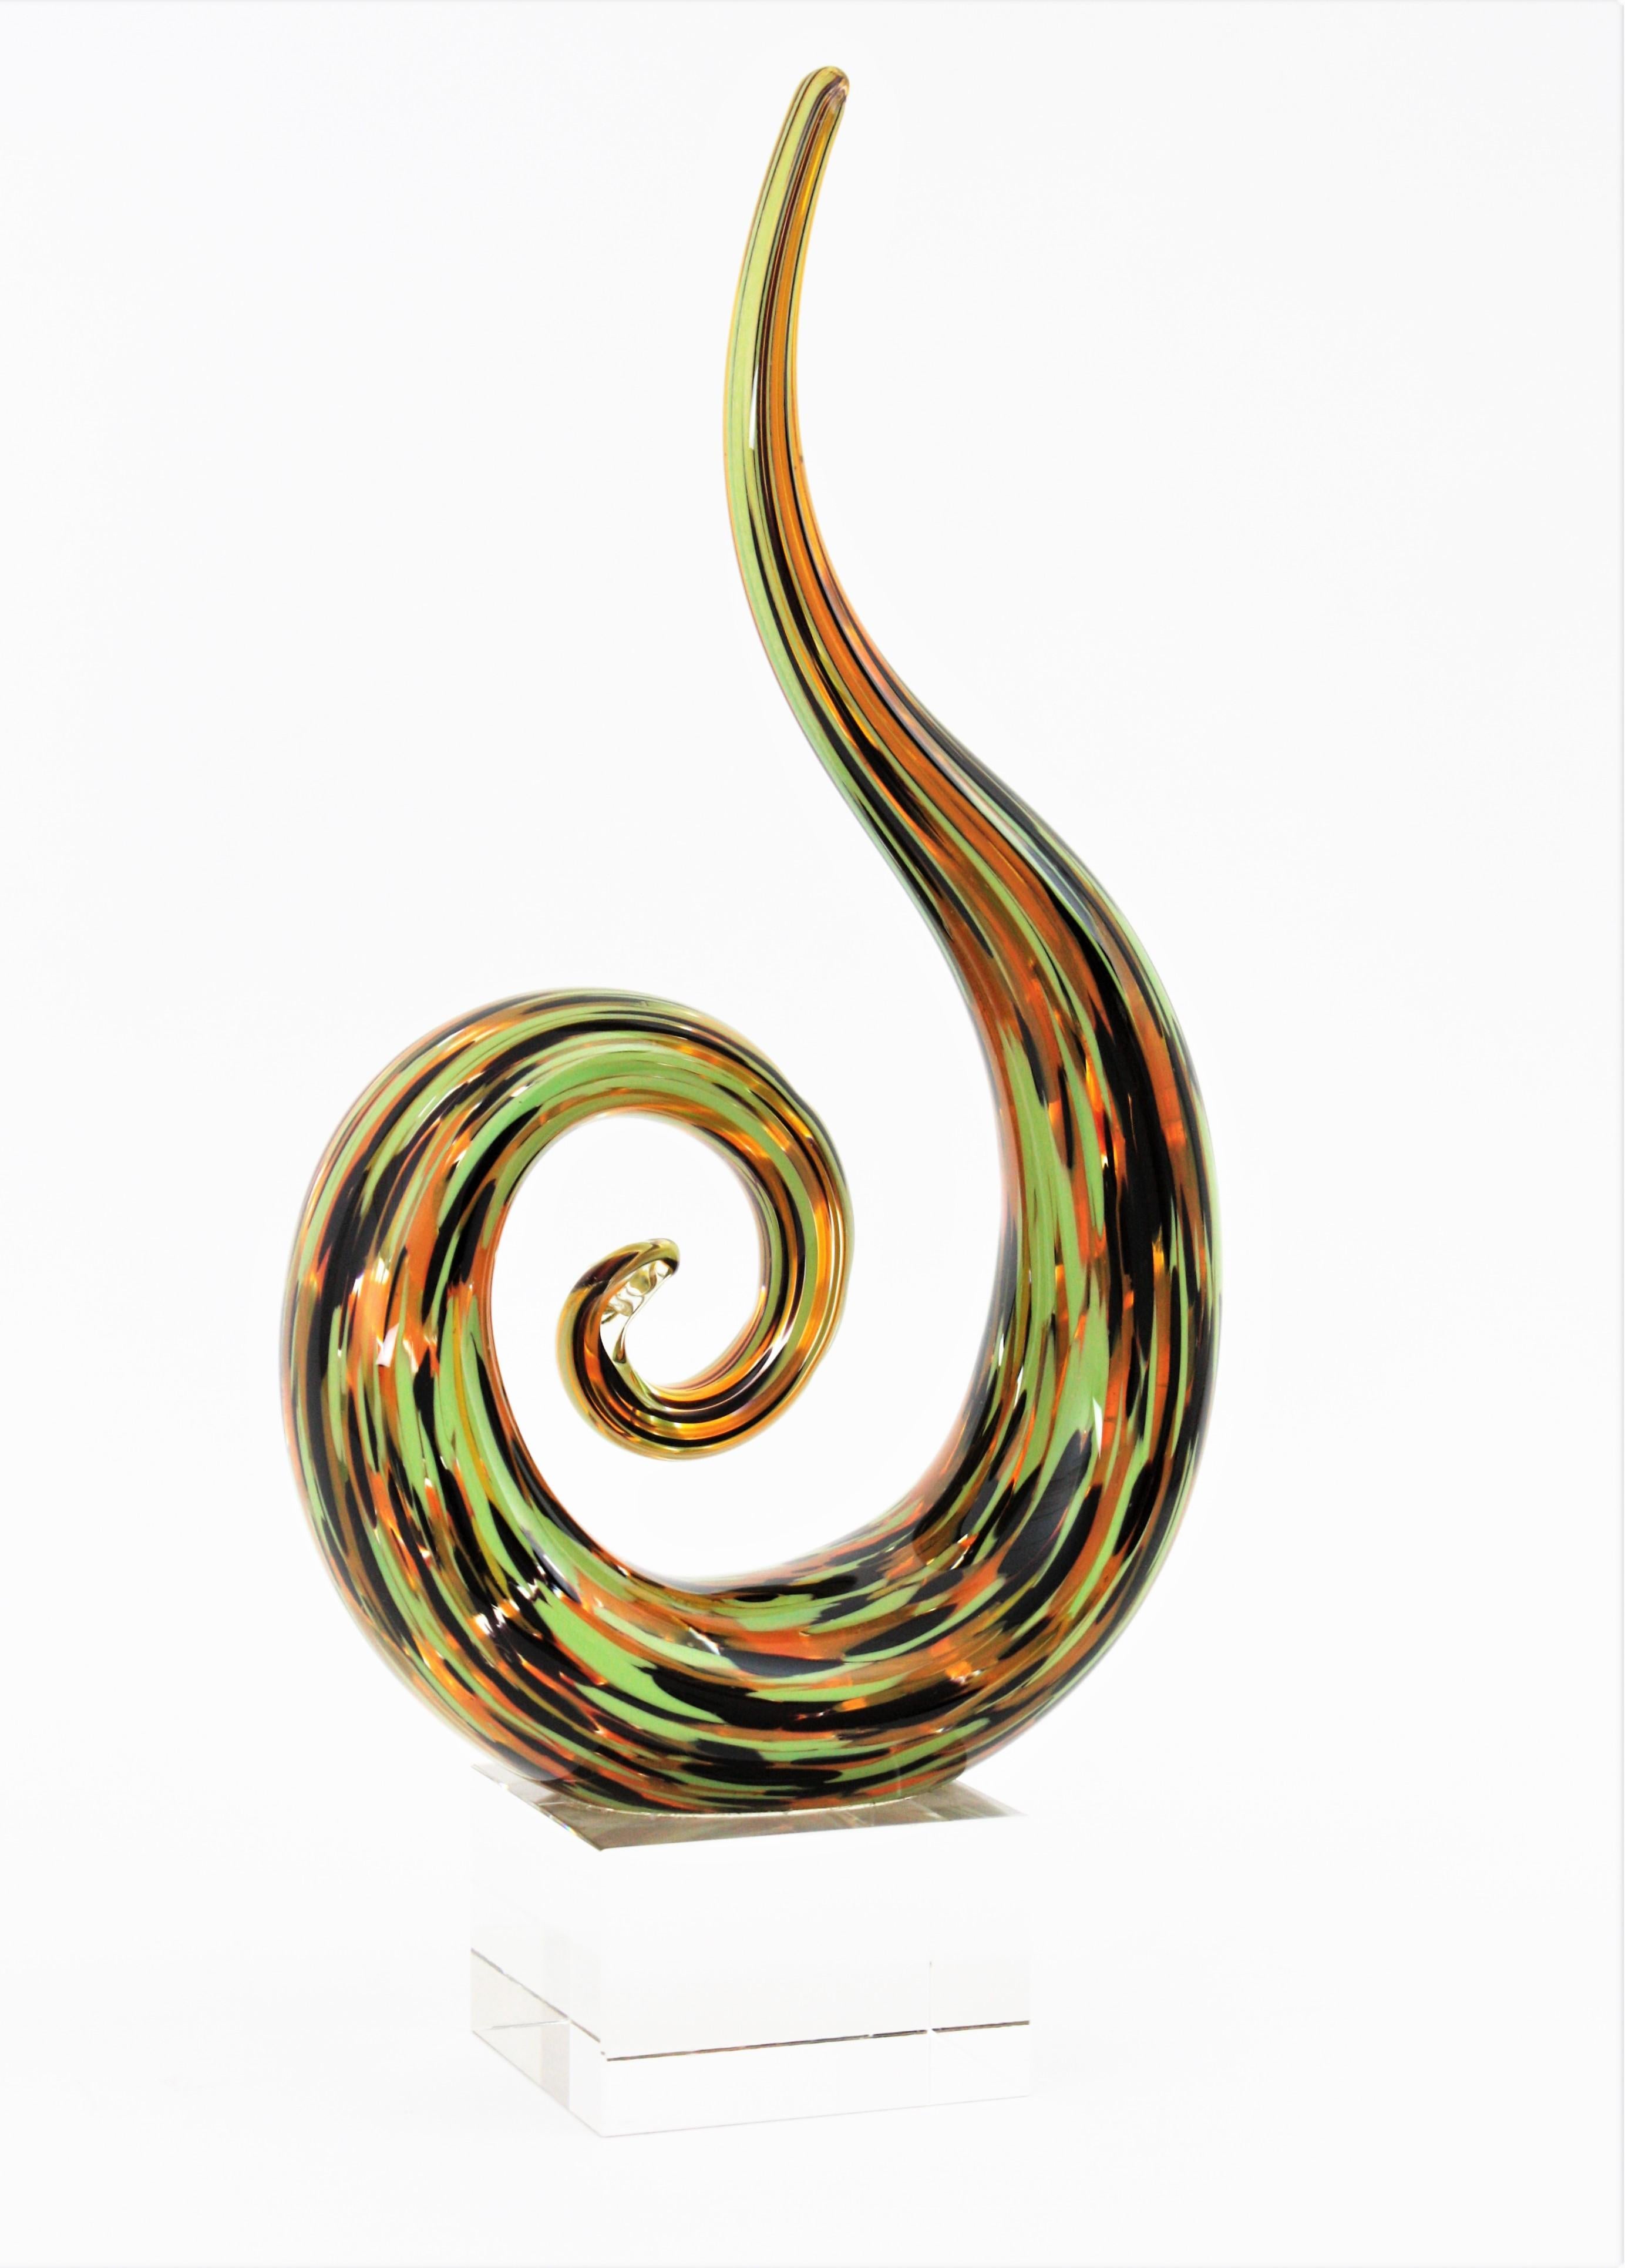 Mid-Century Modern Murano Art Glass Multi Color Spiral Paperweight Sculpture, Italy, 1960s For Sale